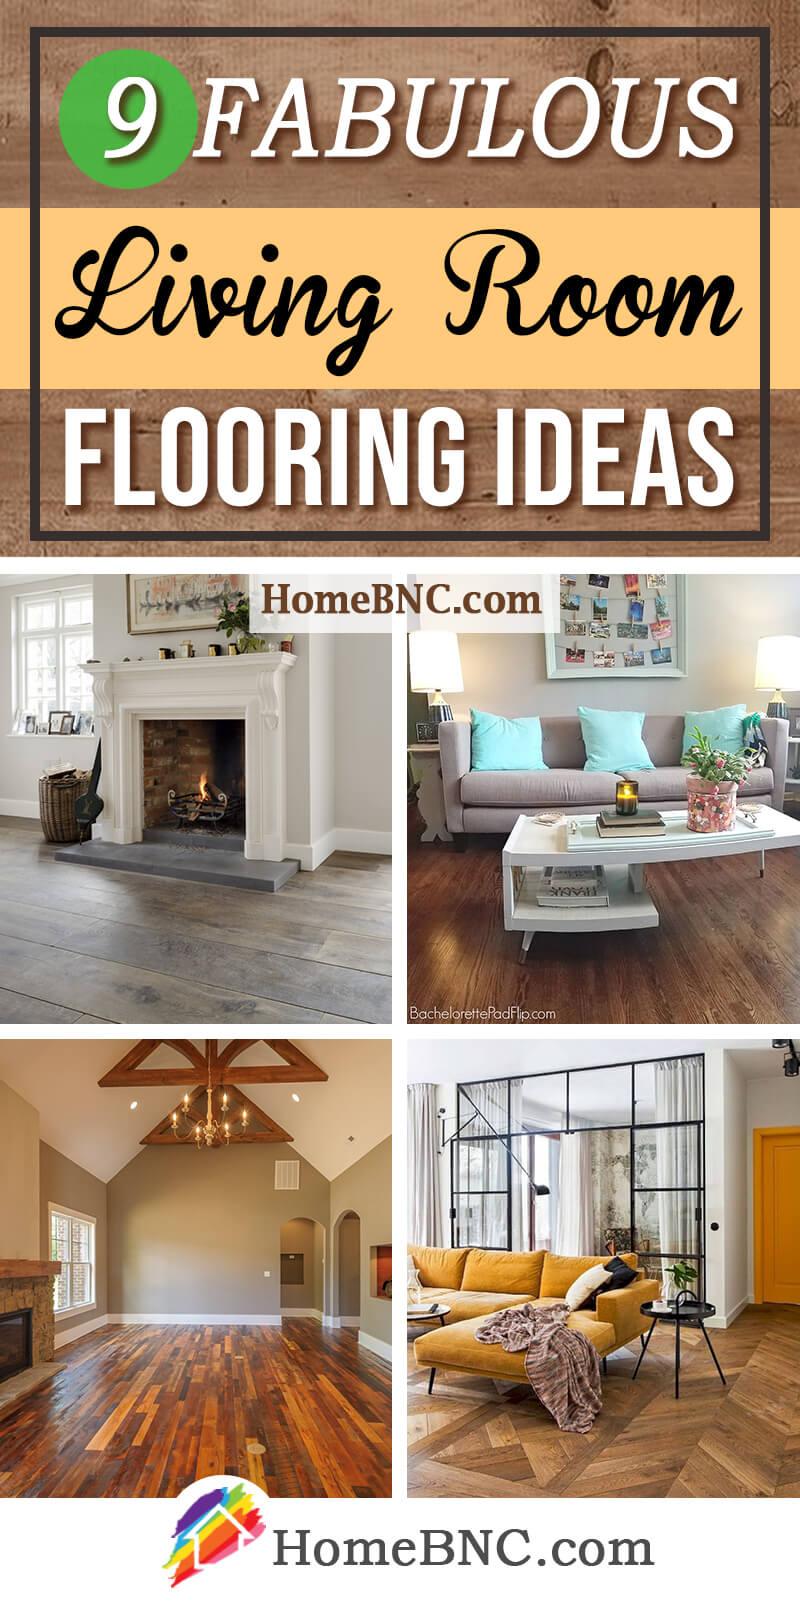 Living Room Floor Design Pattern - What You Need To Consider